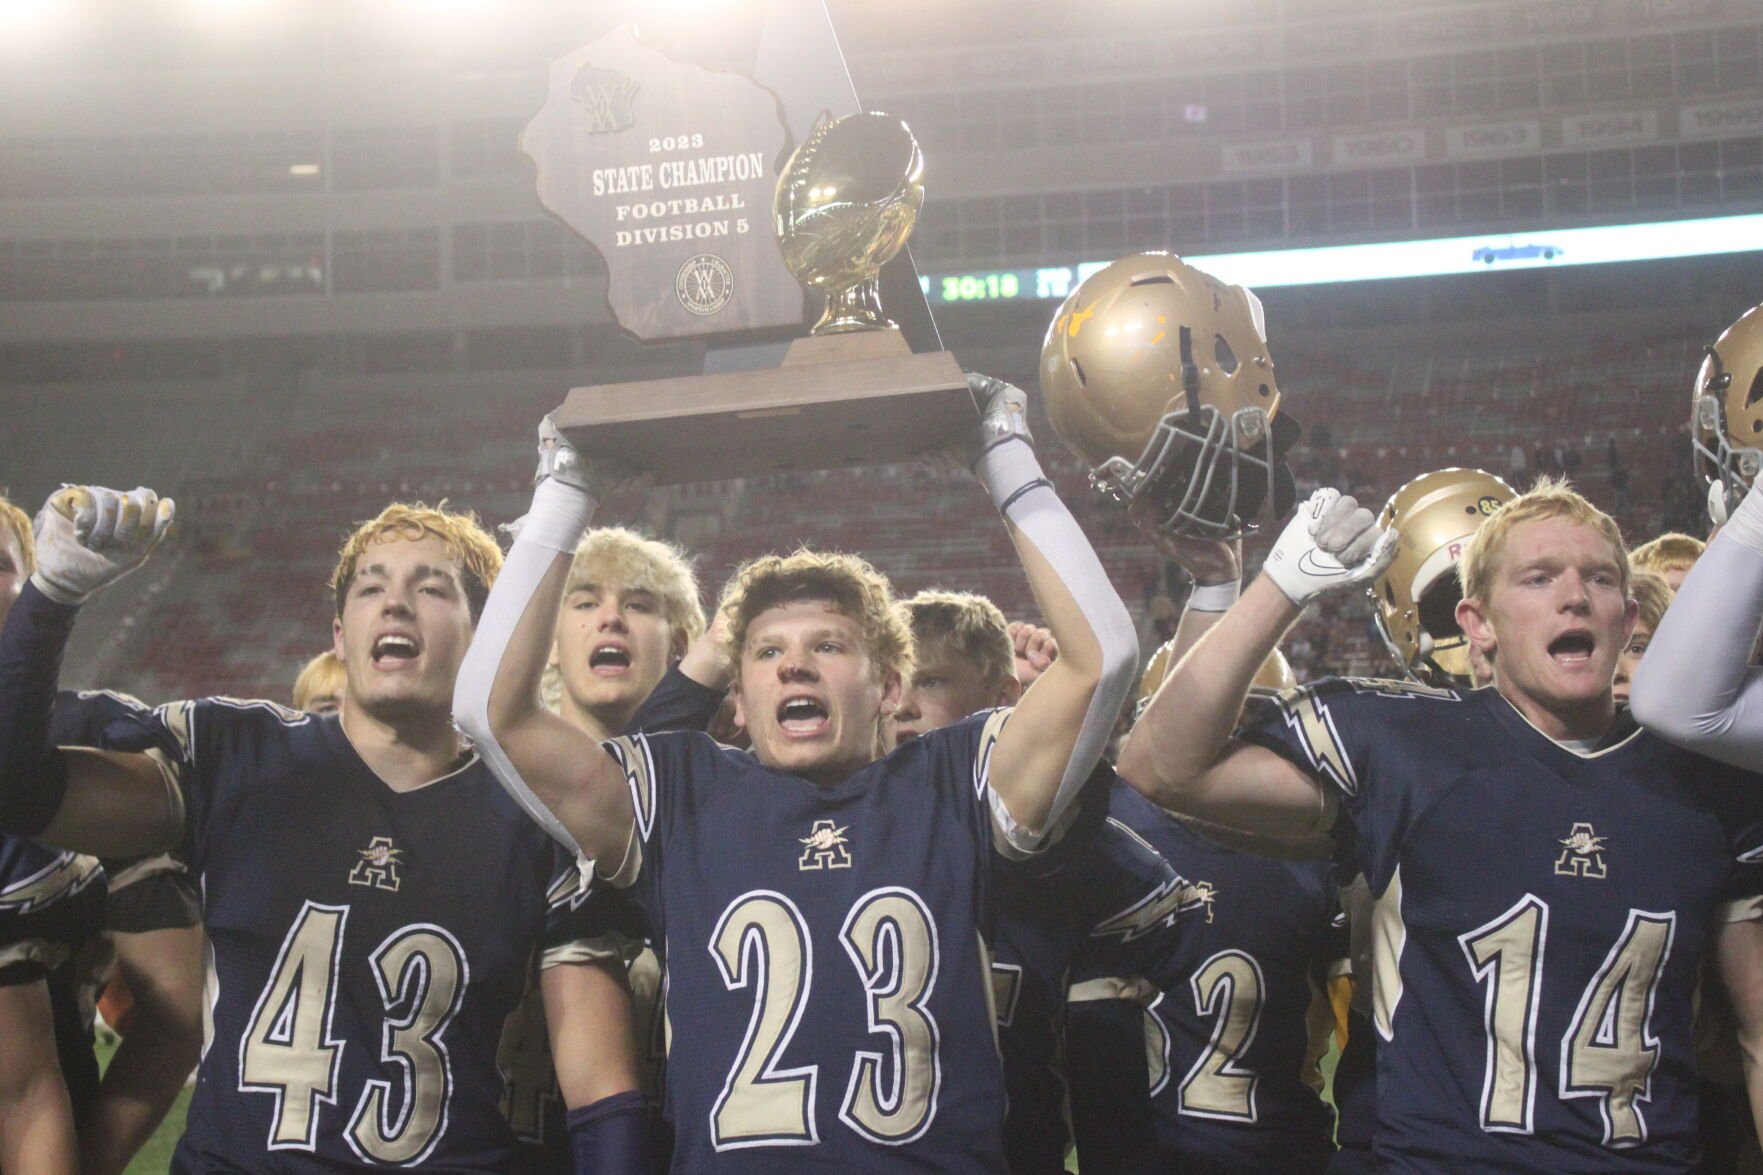 La Crosse Aquinas Secures Third Consecutive WIAA Division 5 Football State Championship with Dominant Performance